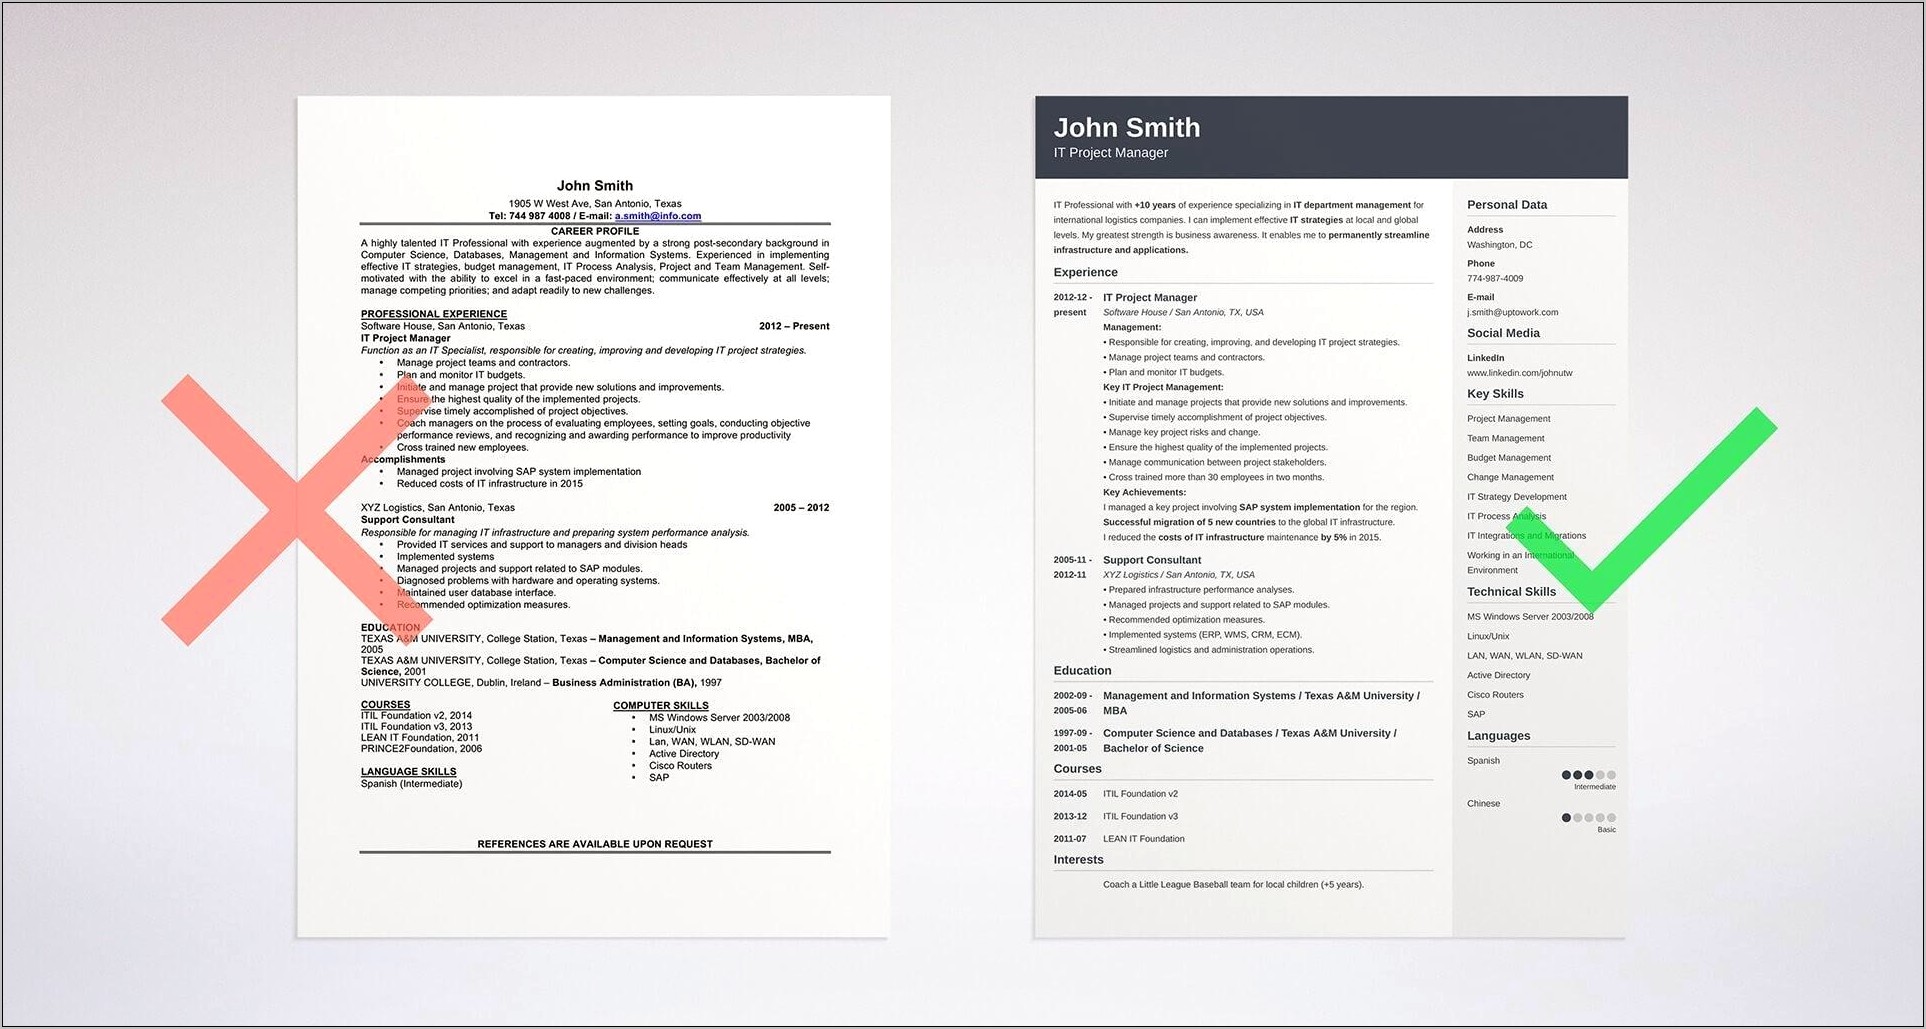 Objective Section Of Resume Expain